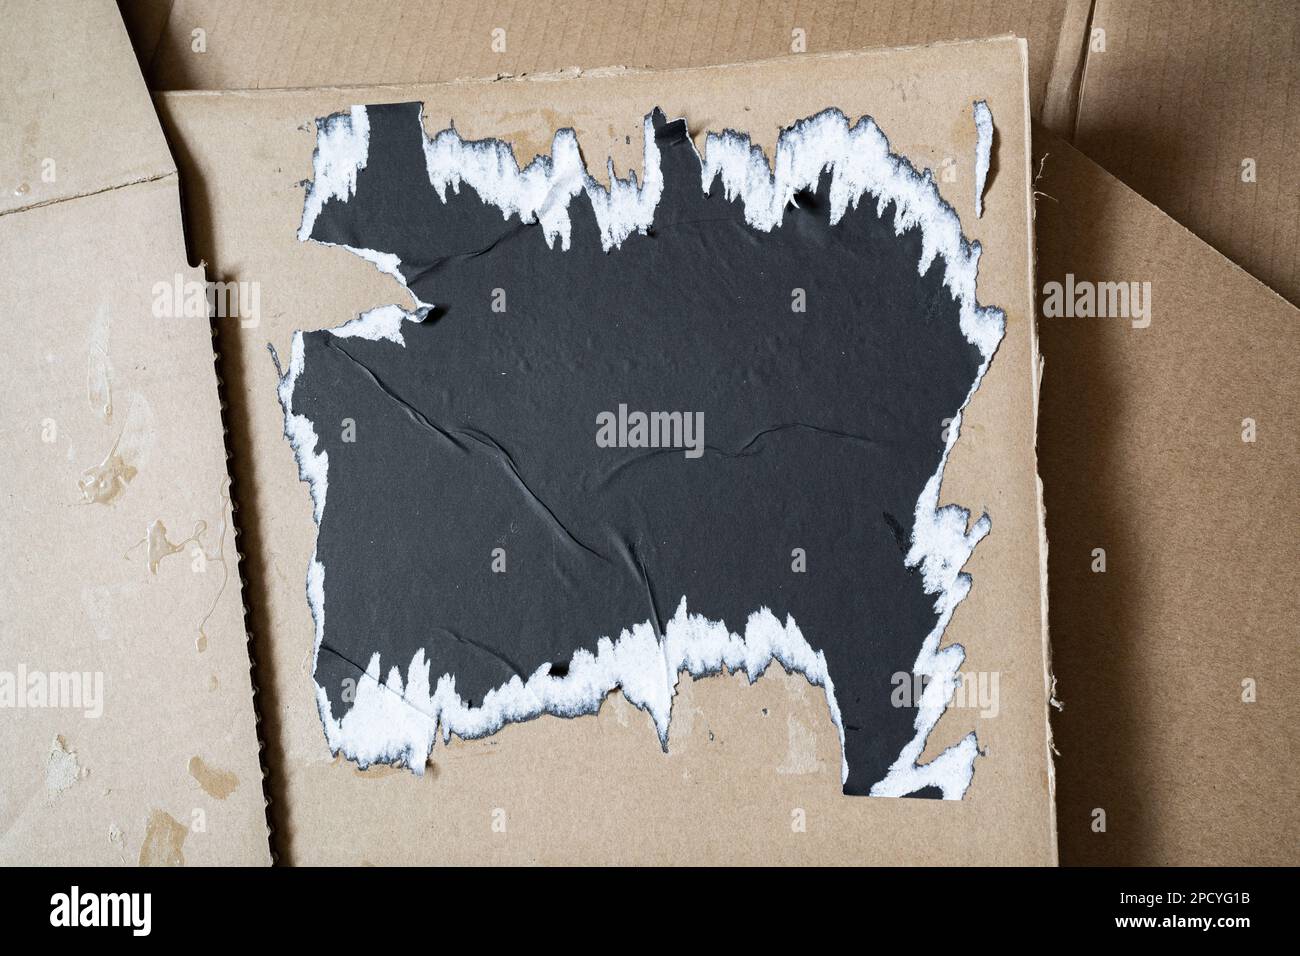 Ripped black square paper on cardboard background Stock Photo